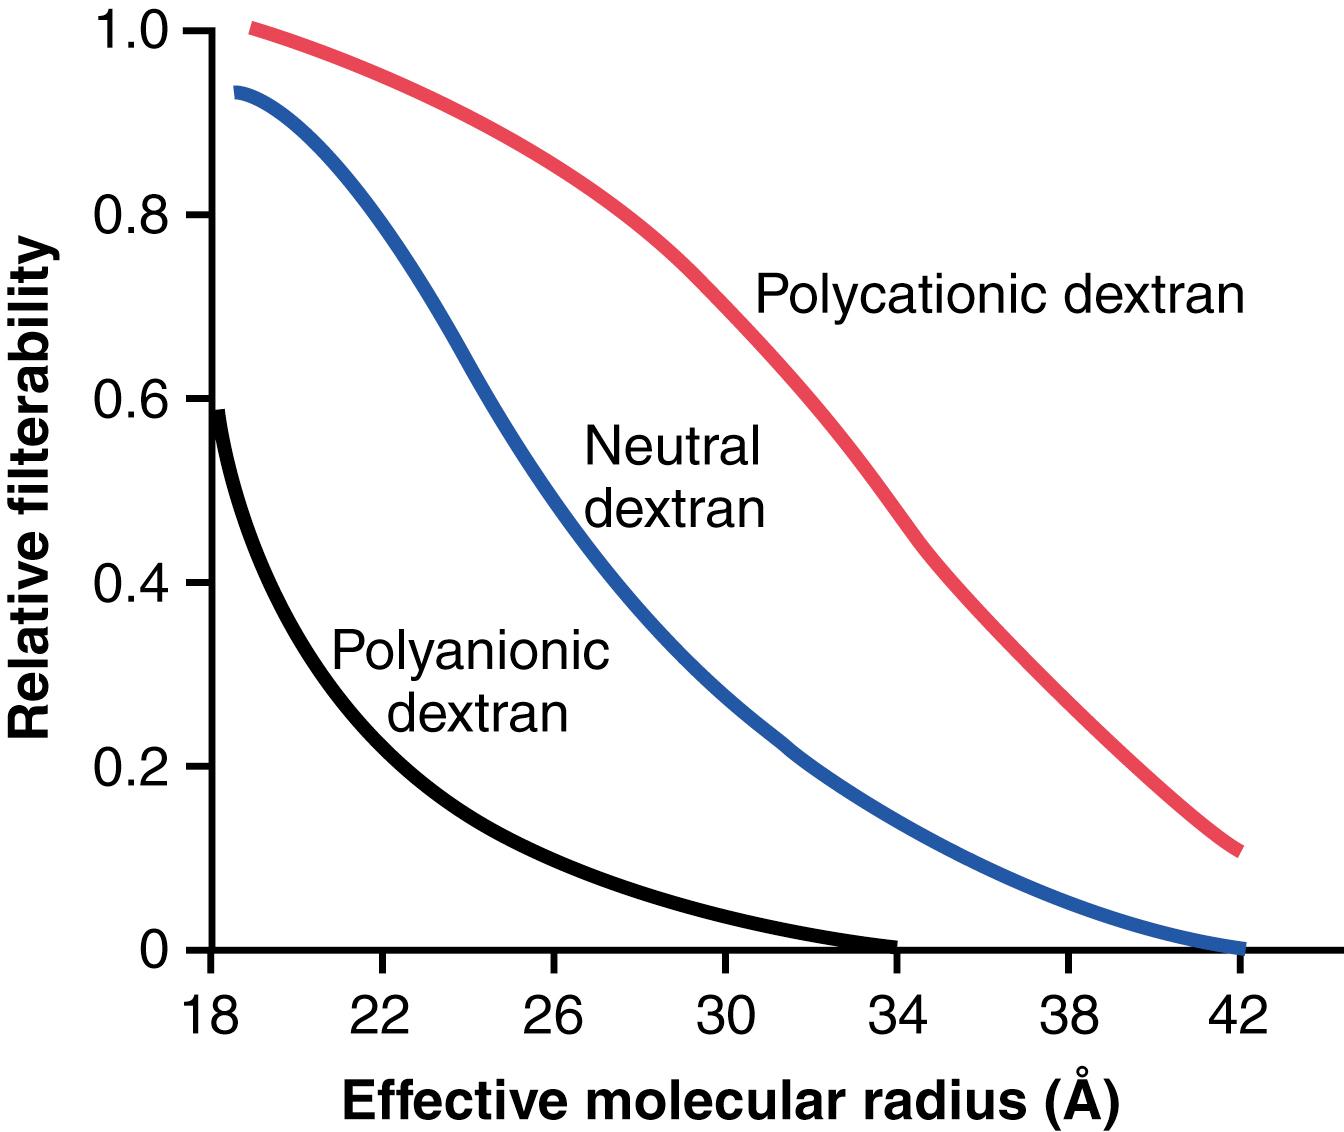 Figure 27-3, Effect of molecular radius and electrical charge of dextran on its filterability by the glomerular capillaries. A value of 1.0 indicates that the substance is filtered as freely as water, whereas a value of 0 indicates that it is not filtered. Dextrans are polysaccharides that can be manufactured as neutral molecules or with negative or positive charges and with varying molecular weights.